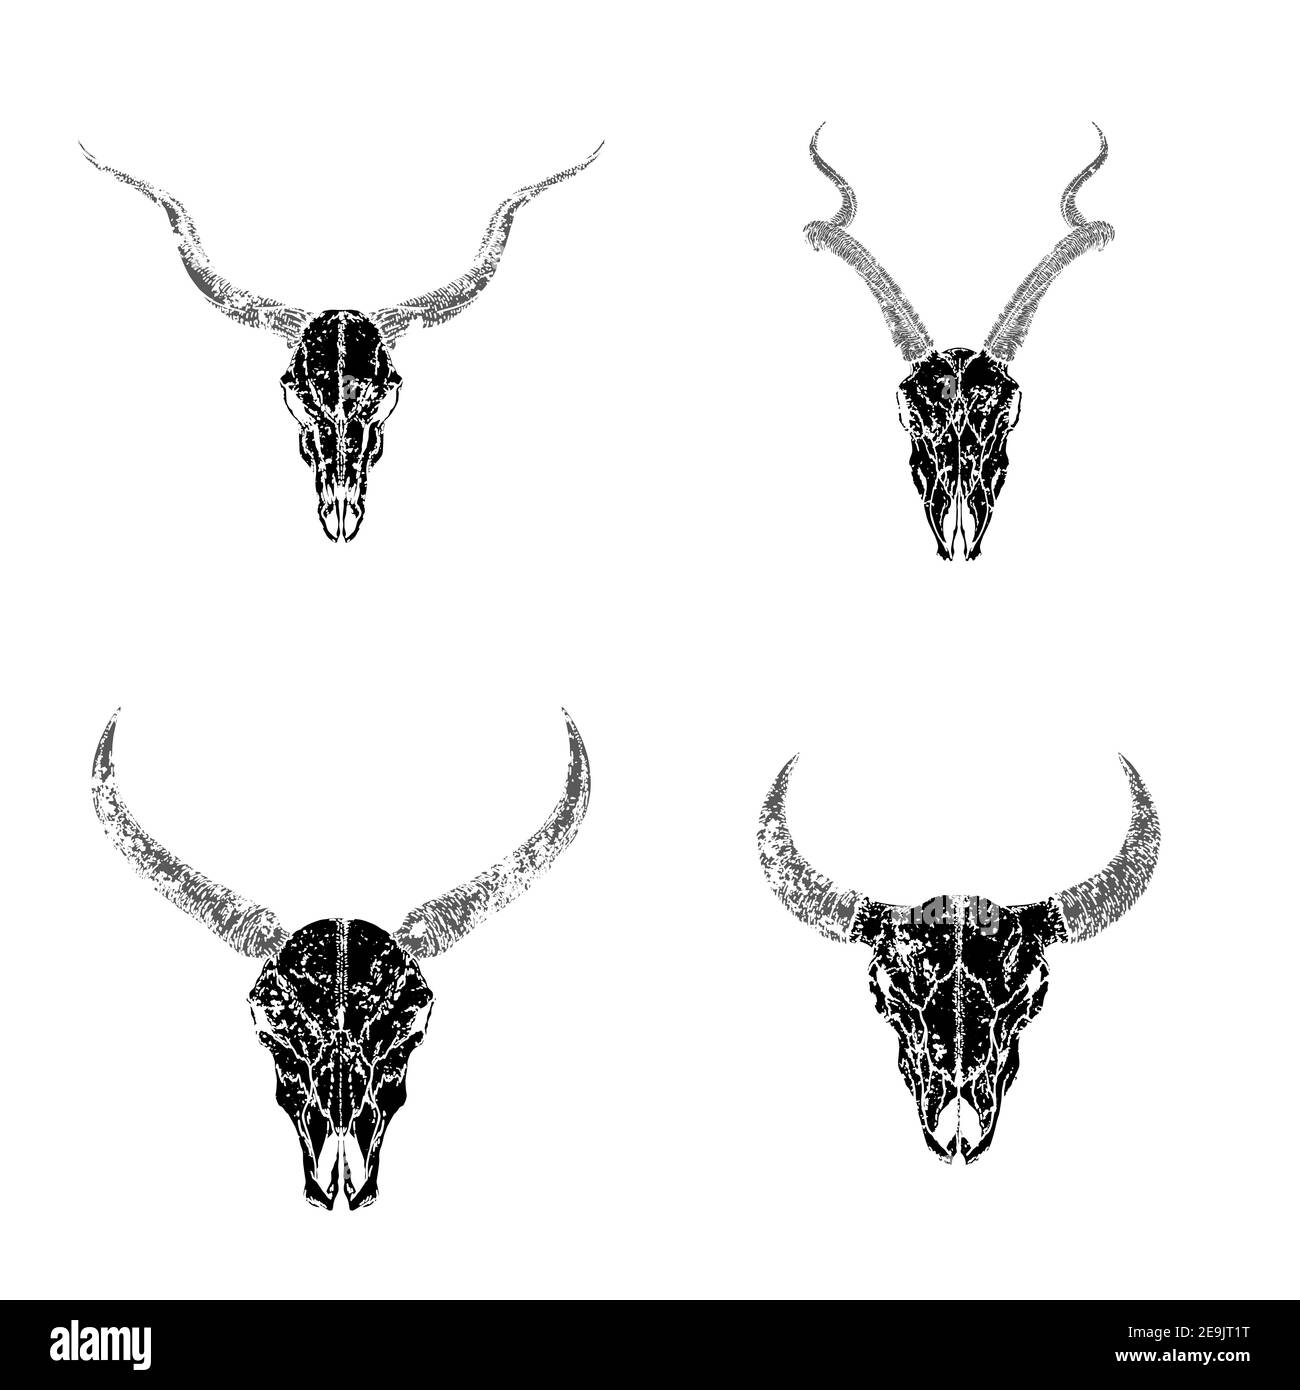 Vector set of hand drawn skulls of horned animals: antelopes, bull and wild buffalo on white background. Black silhouettes with grunge texture. For yo Stock Vector